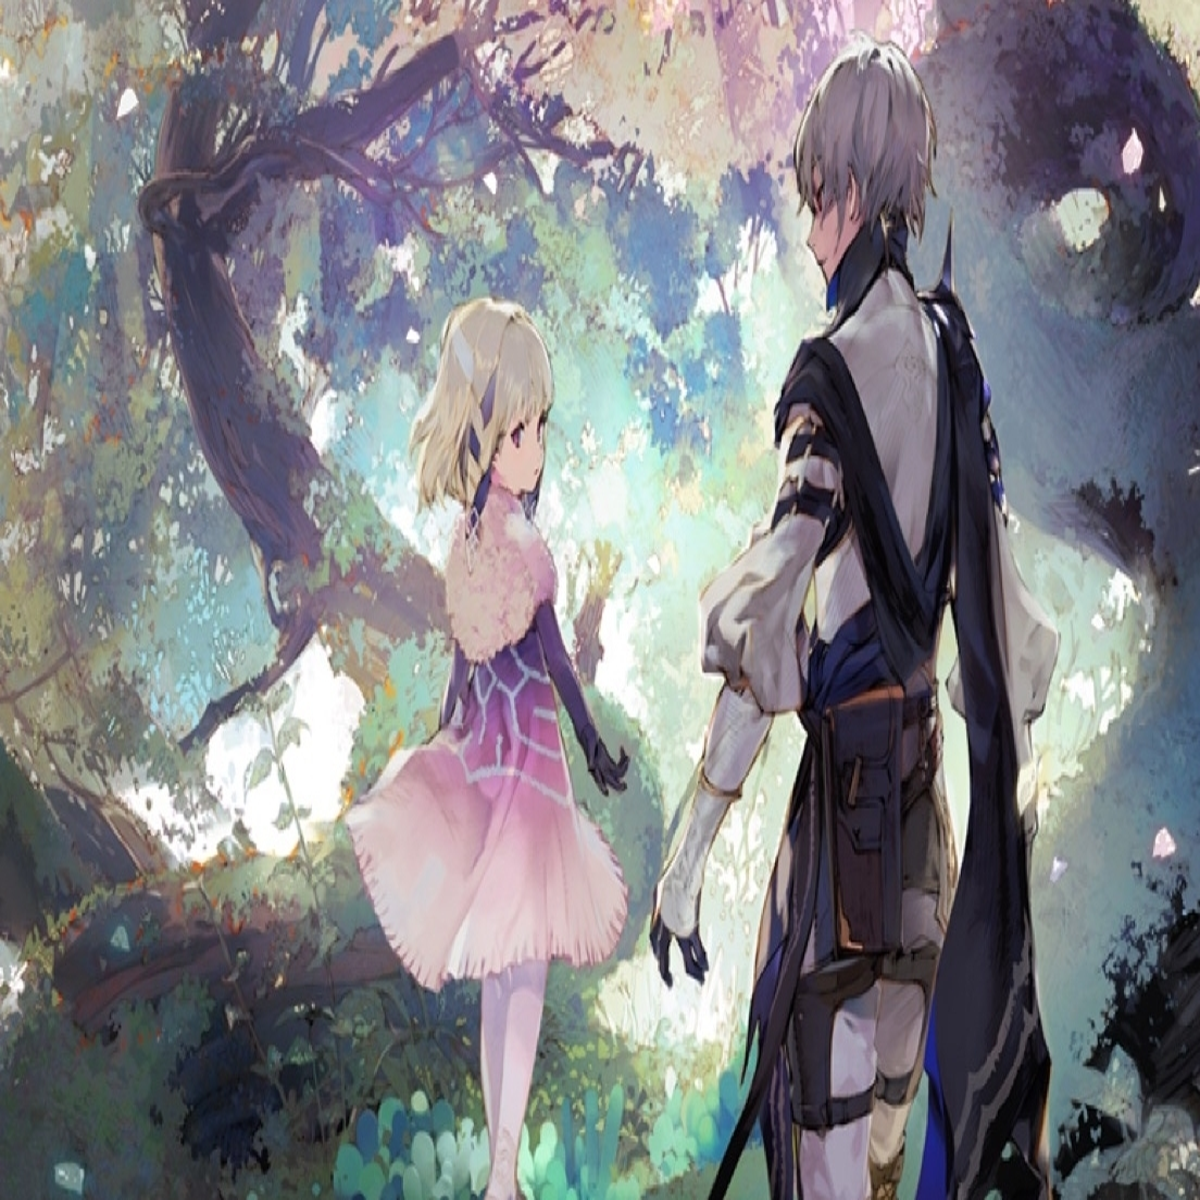 Square Enix to offer physical version of Oninaki in Europe through